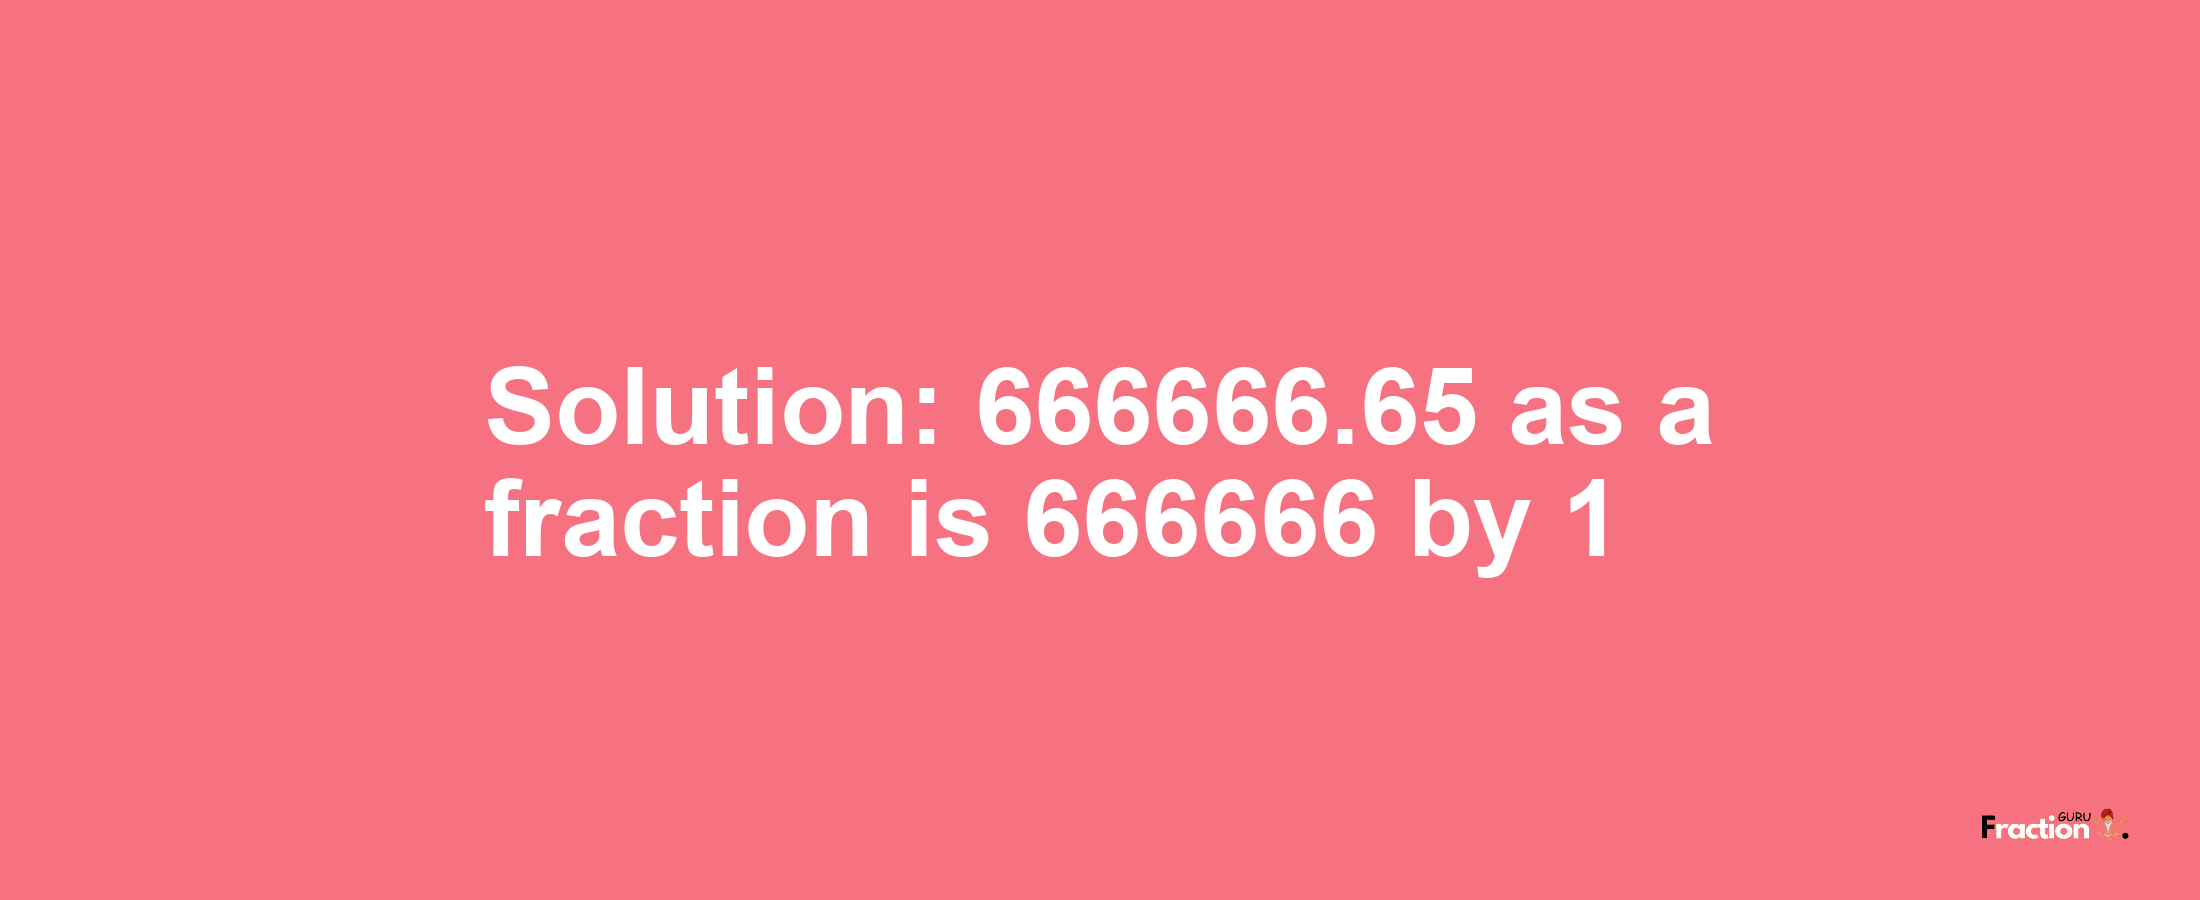 Solution:666666.65 as a fraction is 666666/1